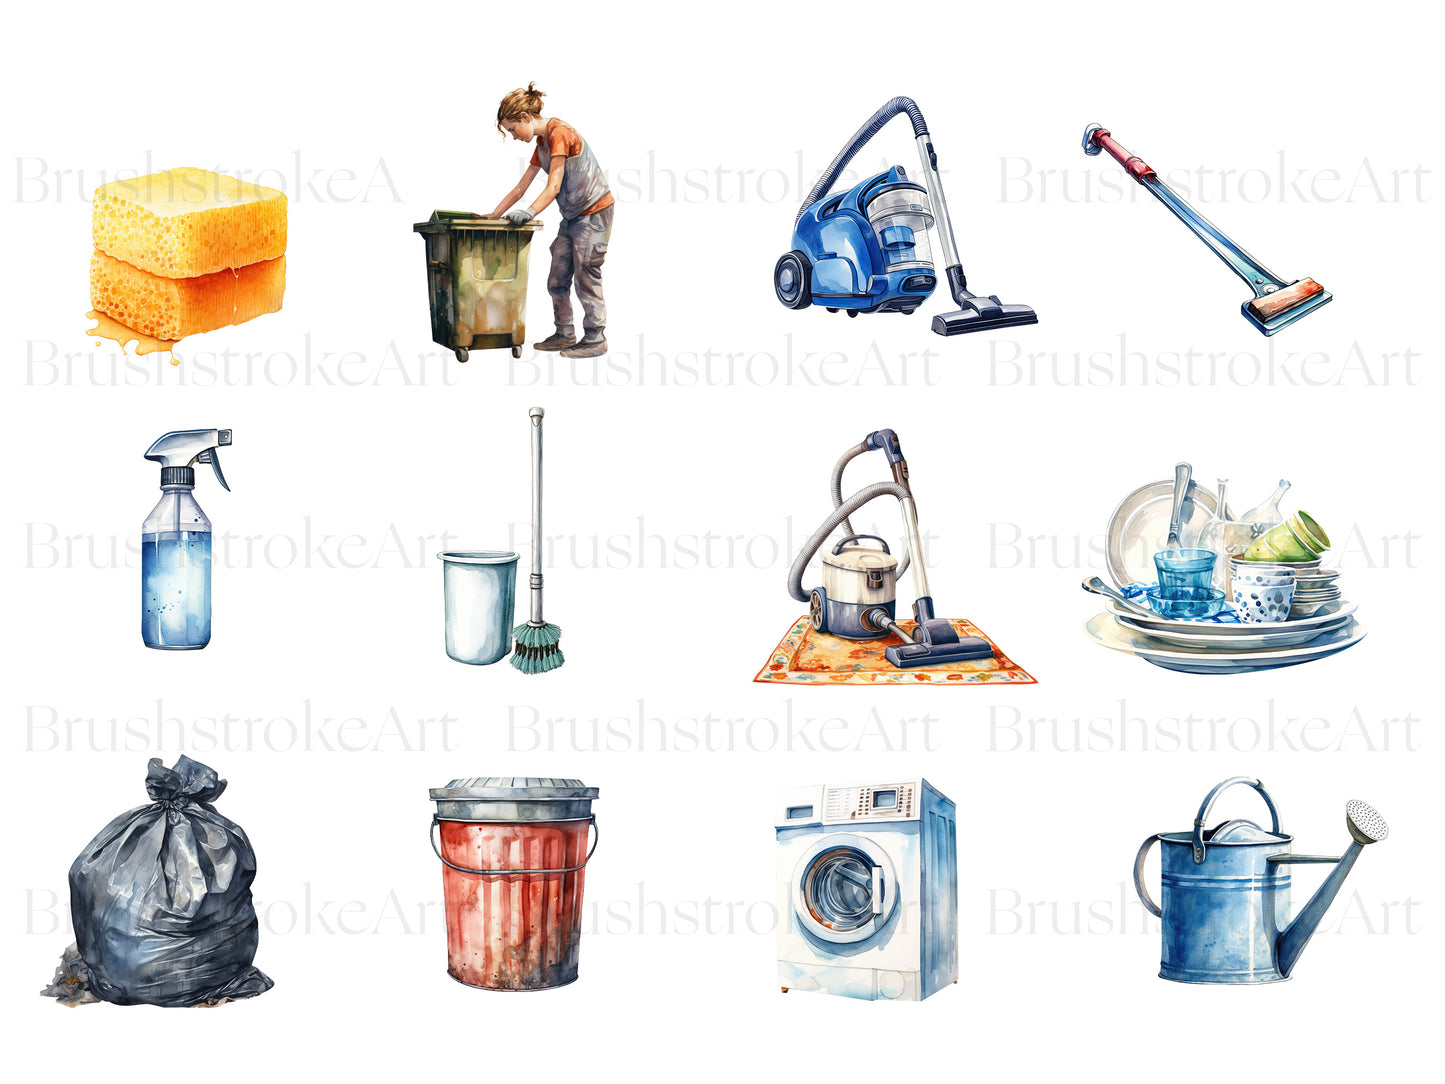 Cleaning supplies